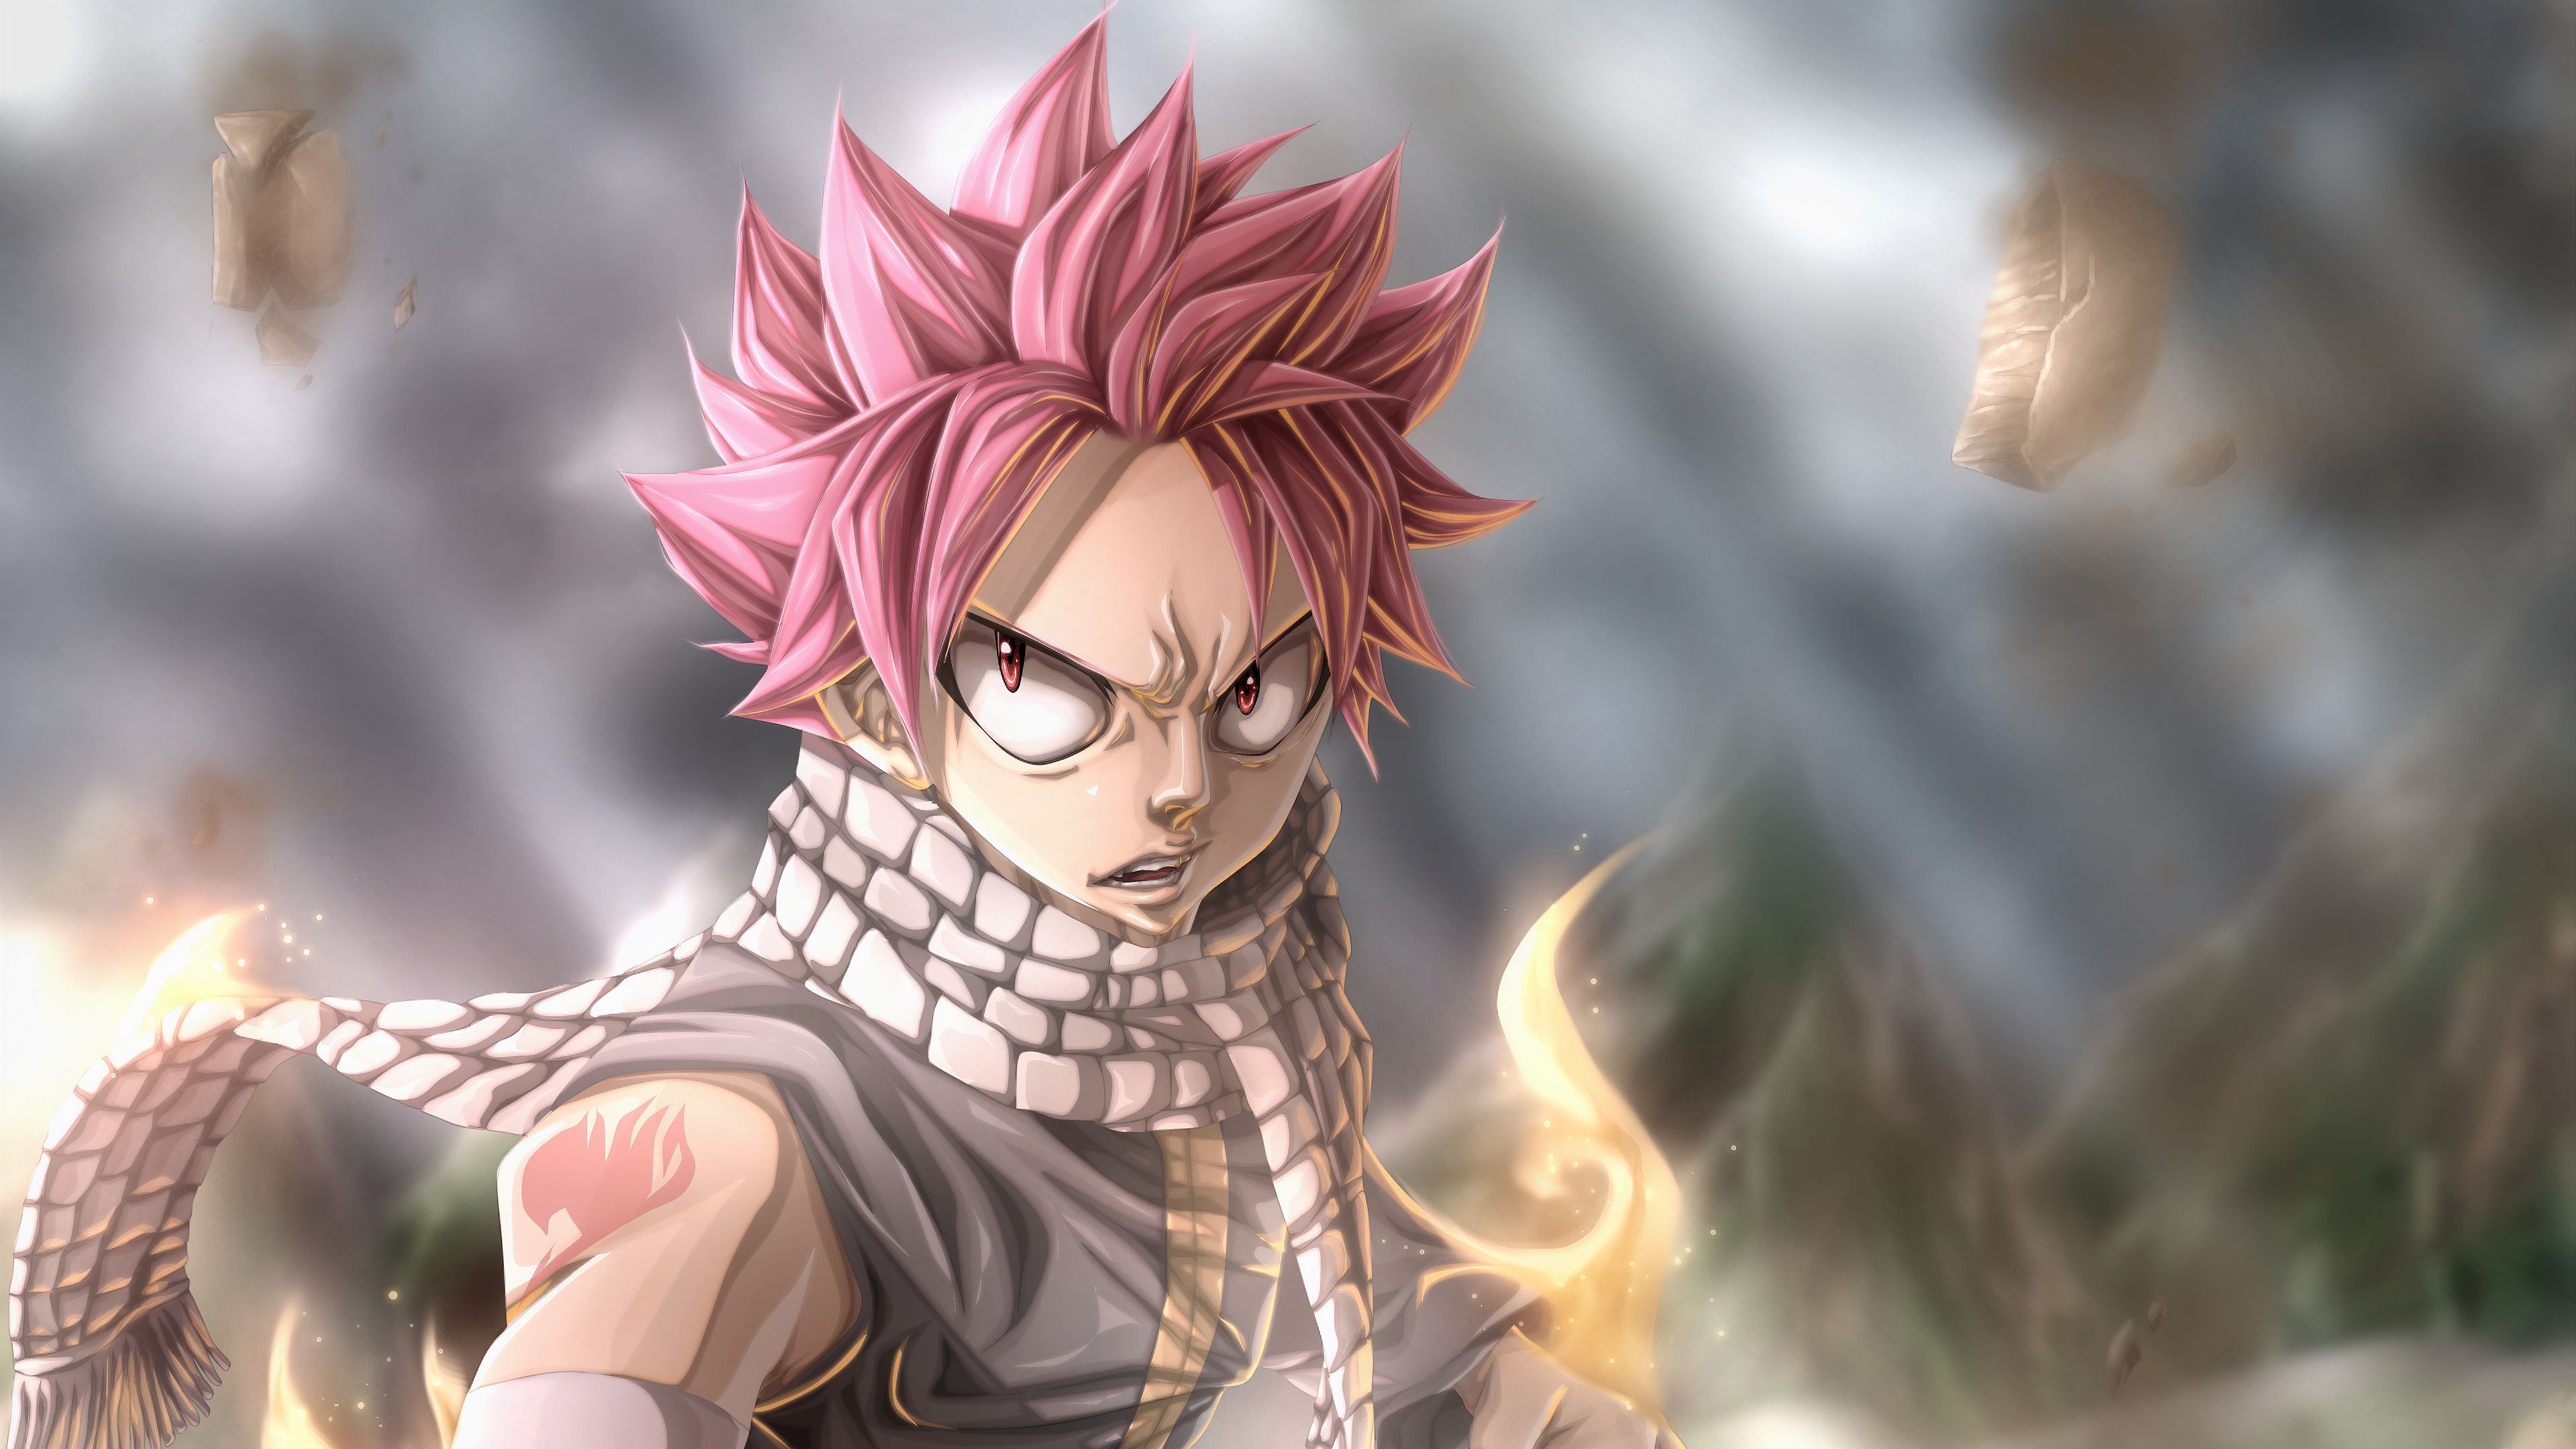 Natsu Fairy Tail Anime 4k, HD Anime, 4k Wallpaper, Image, Background, Photo and Picture